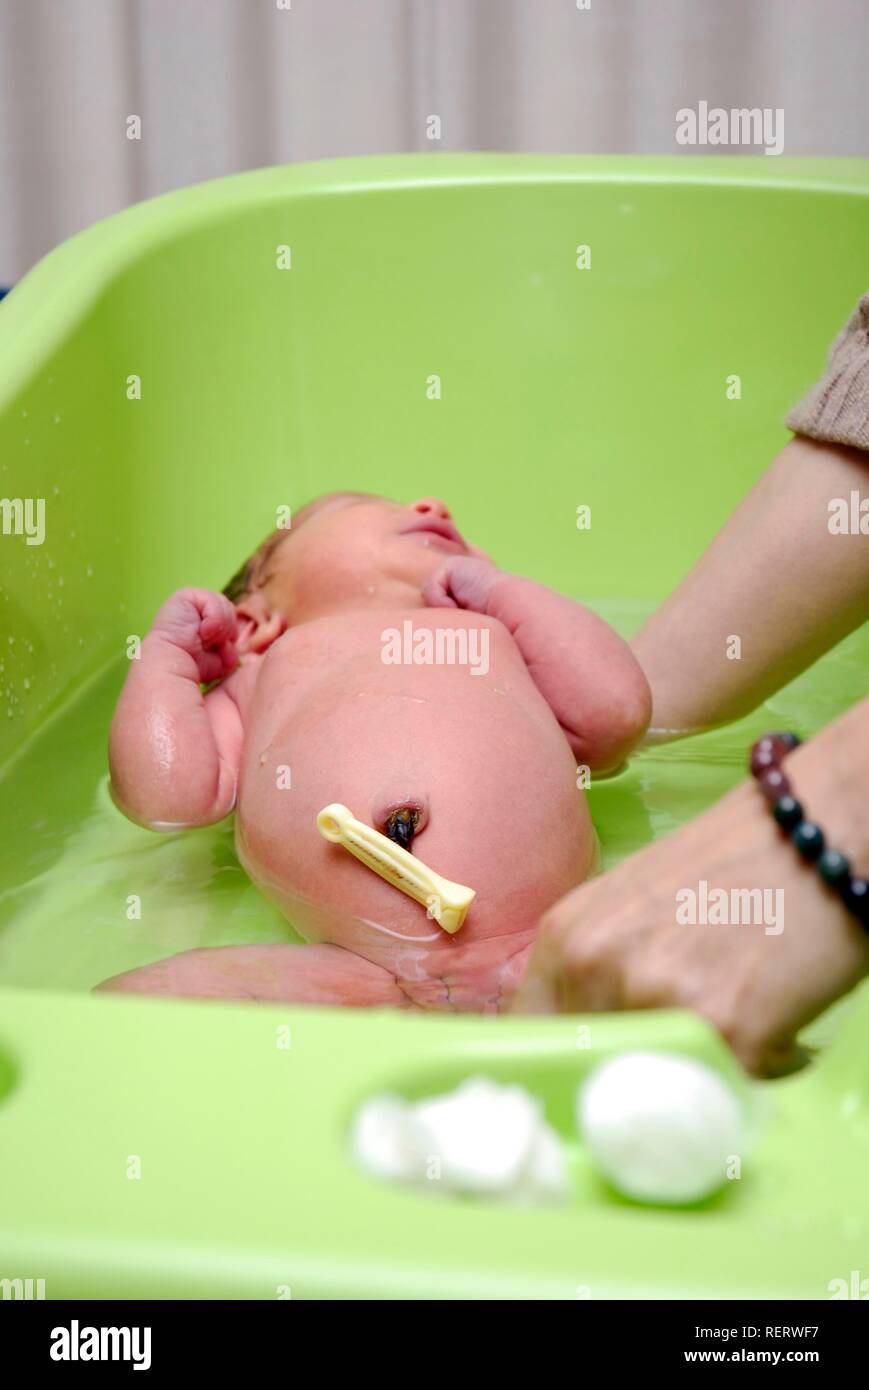 bathing a newborn with umbilical cord